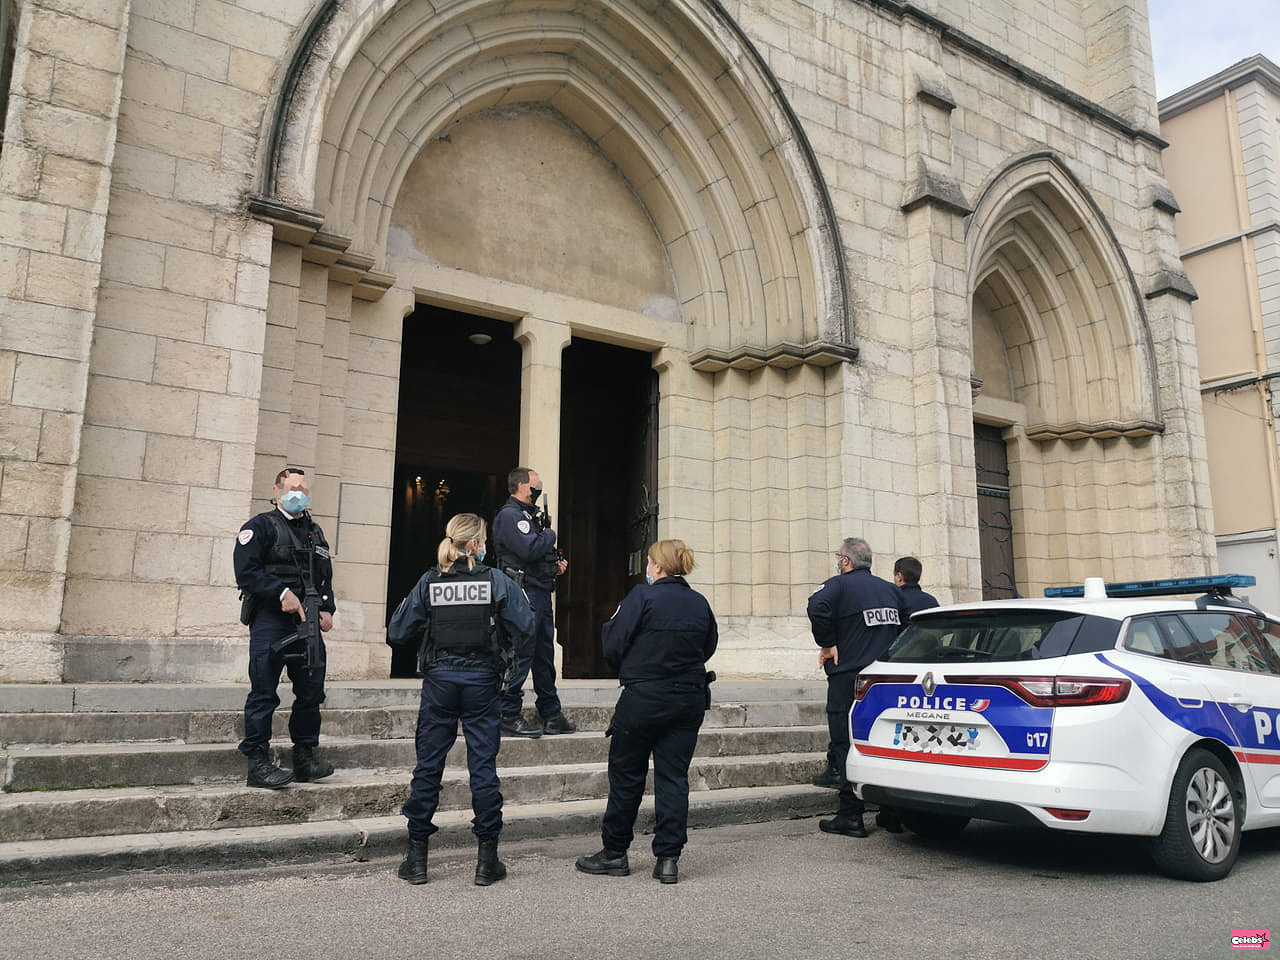 Places of worship threatened for Easter? ISIS video calls for attacks on Christians